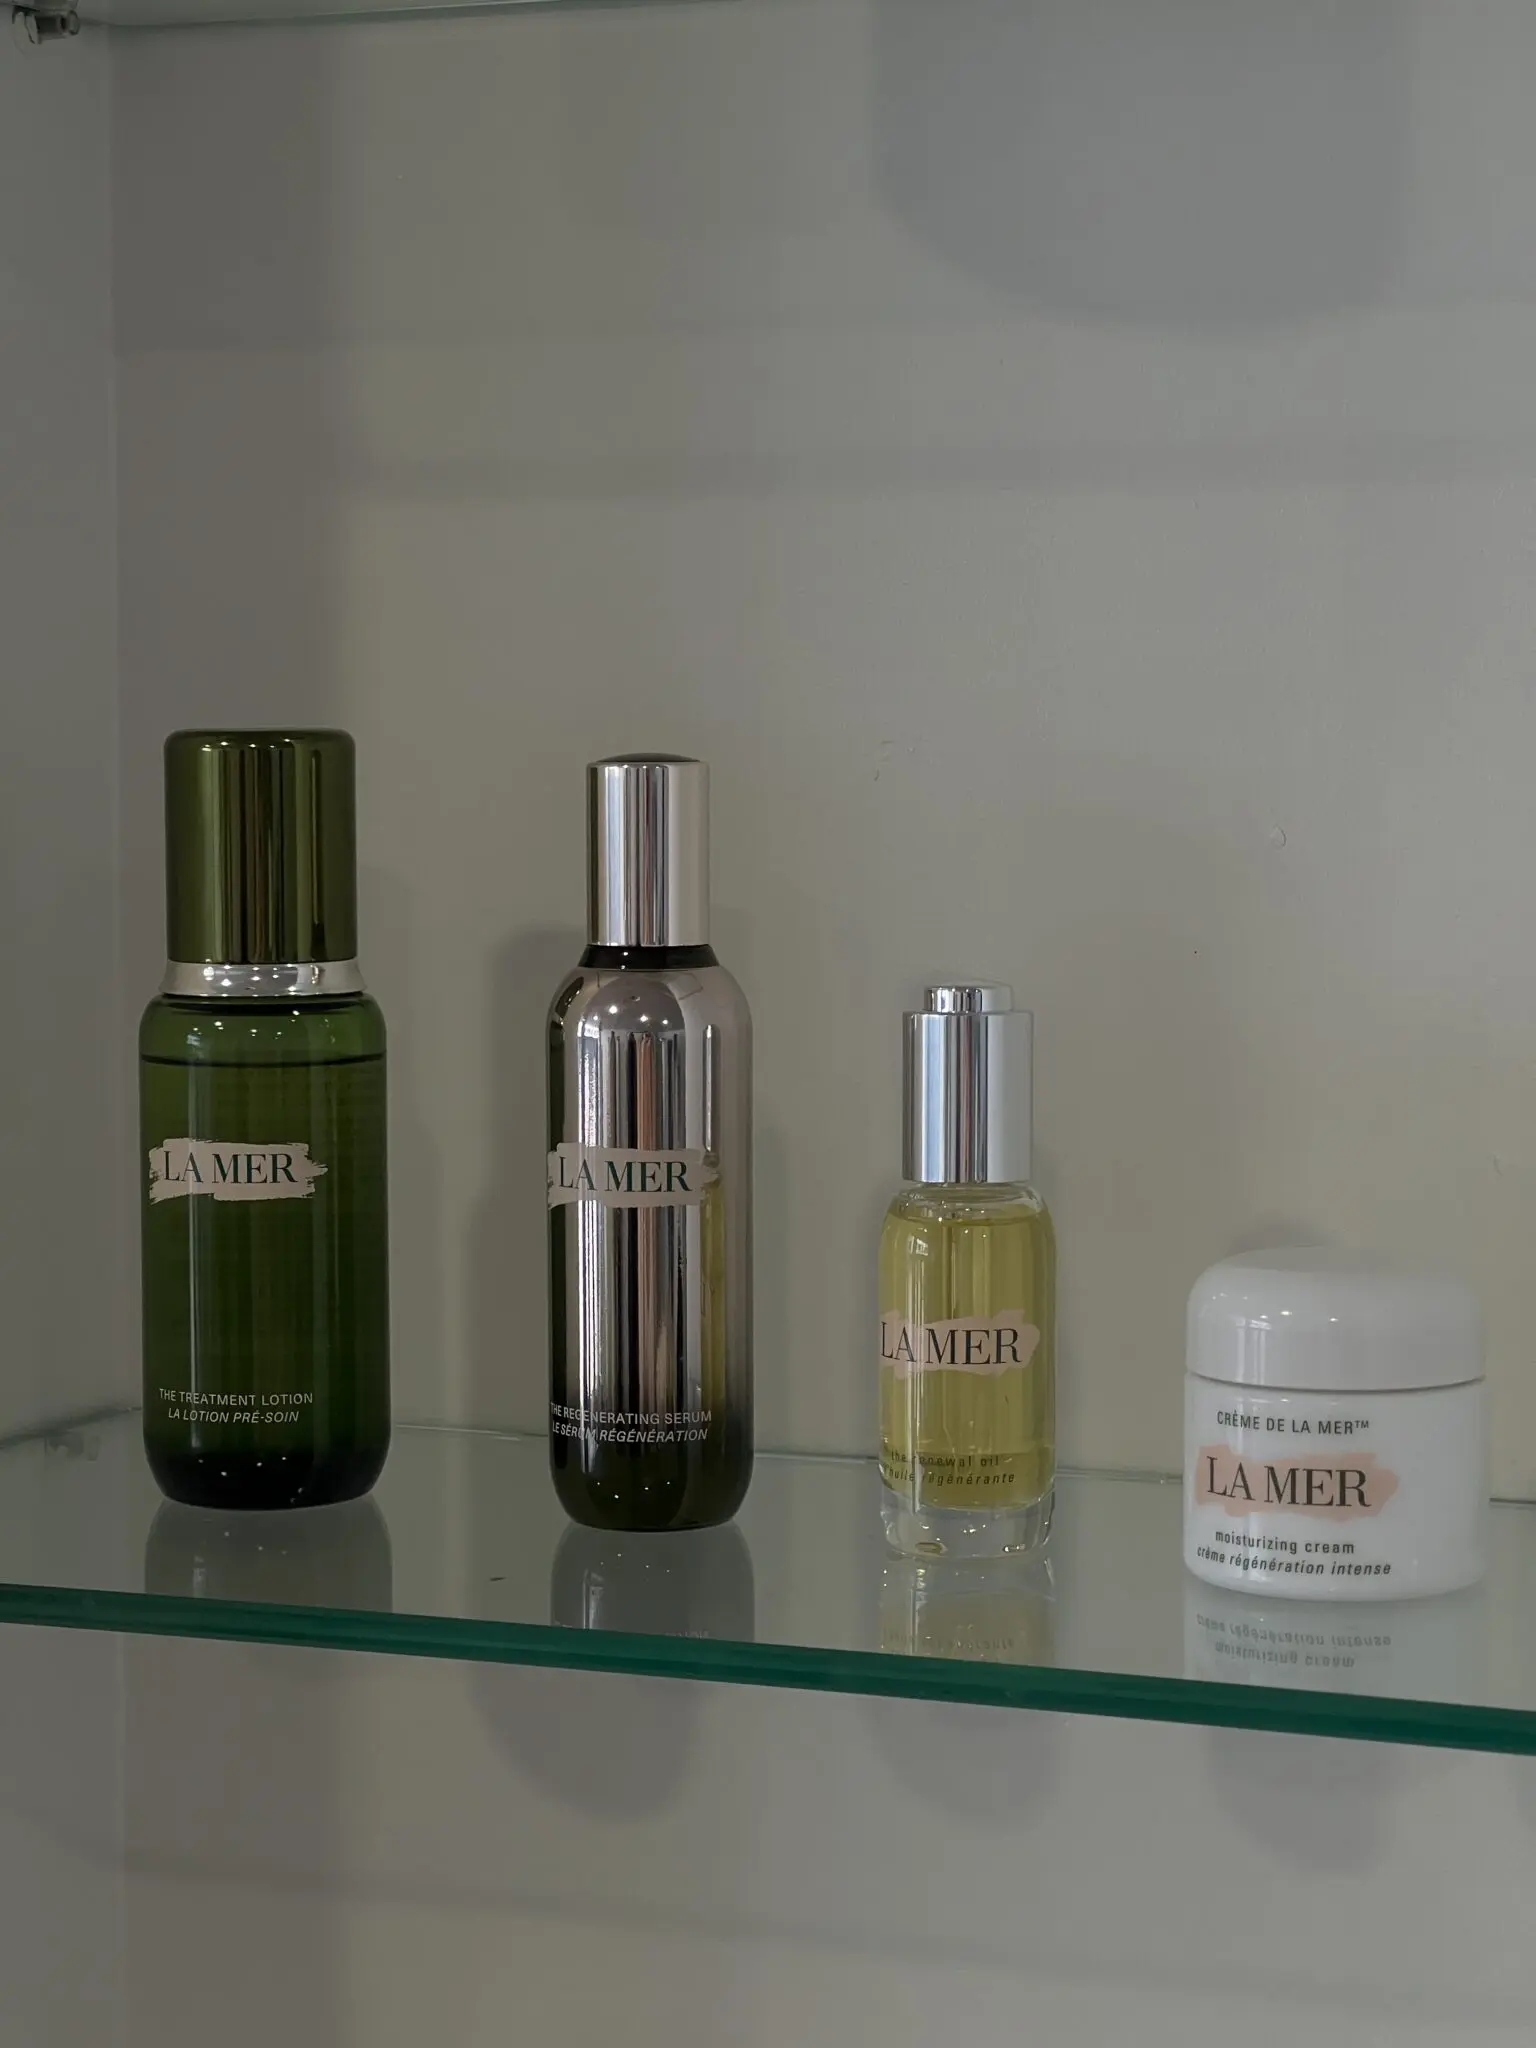 La Mer : 12 Things You Didn't Know About La Mer. Beauty Edit. 11